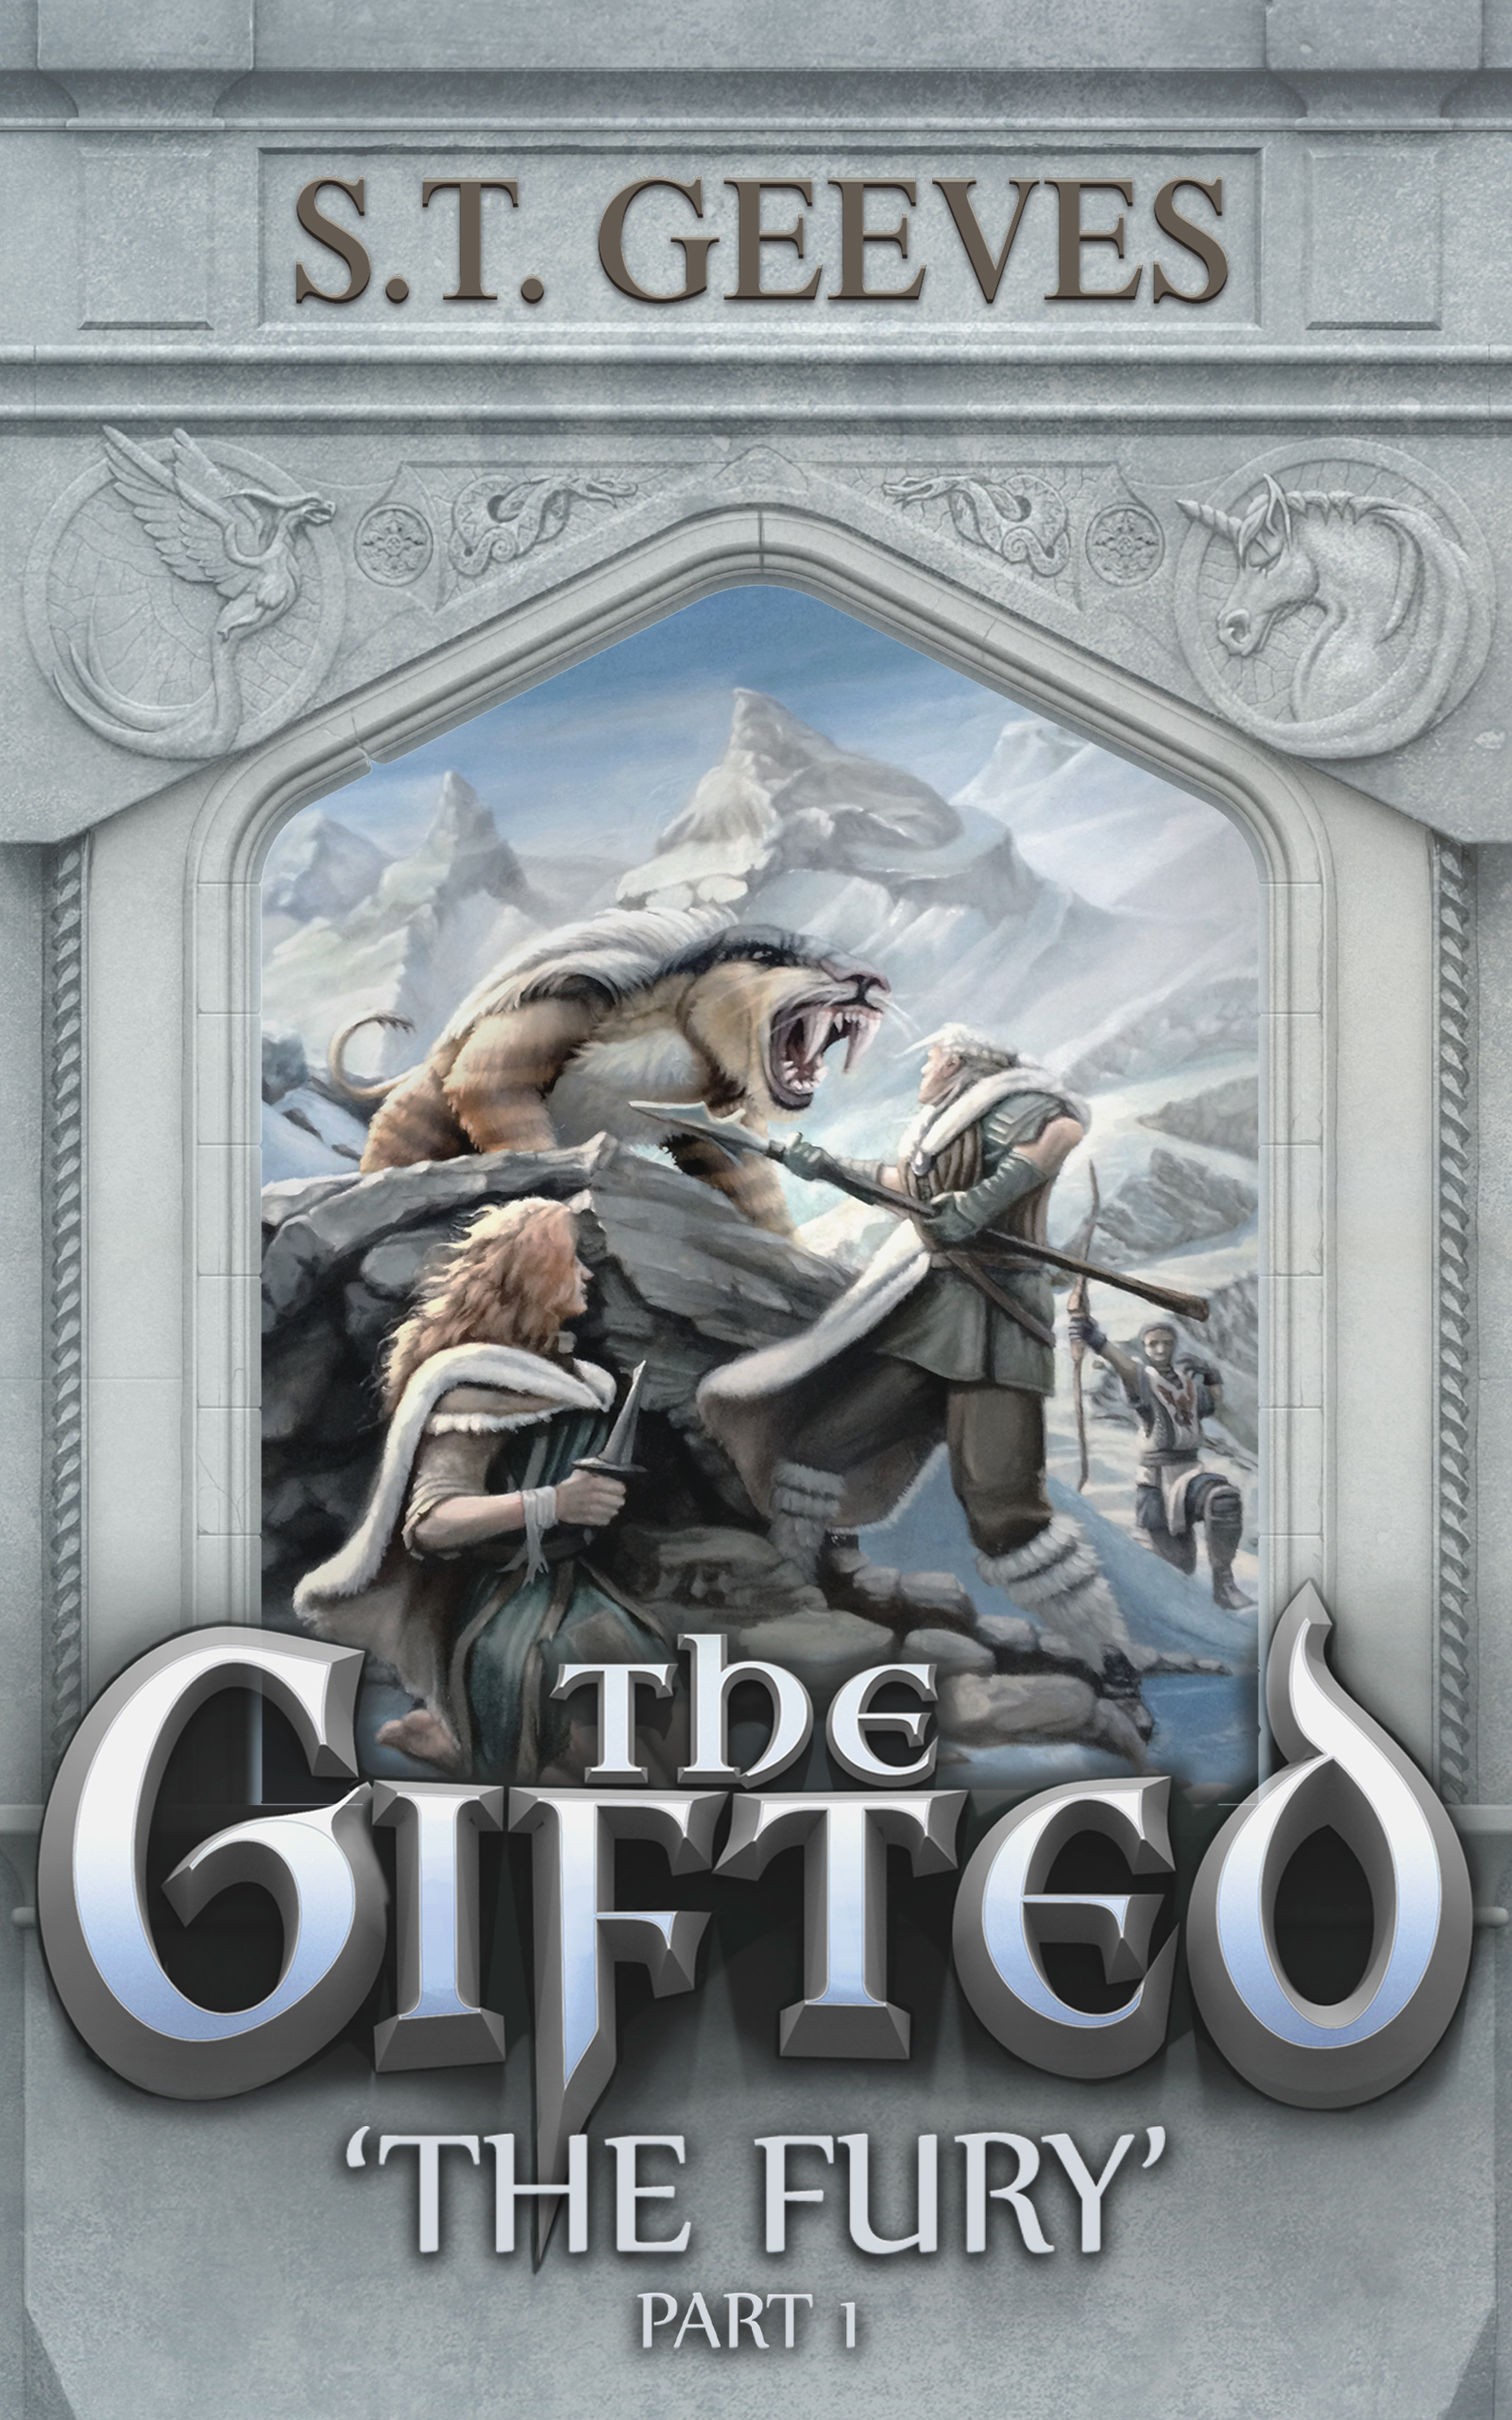 Cover by https://garytrow.crevado.com/book-cover-design-with-illustration
A man with a spear faces a fierce mystical cat-like beast. A girl in the foreground clutches a dagger, whilst an archer crouches before snowy mountains.